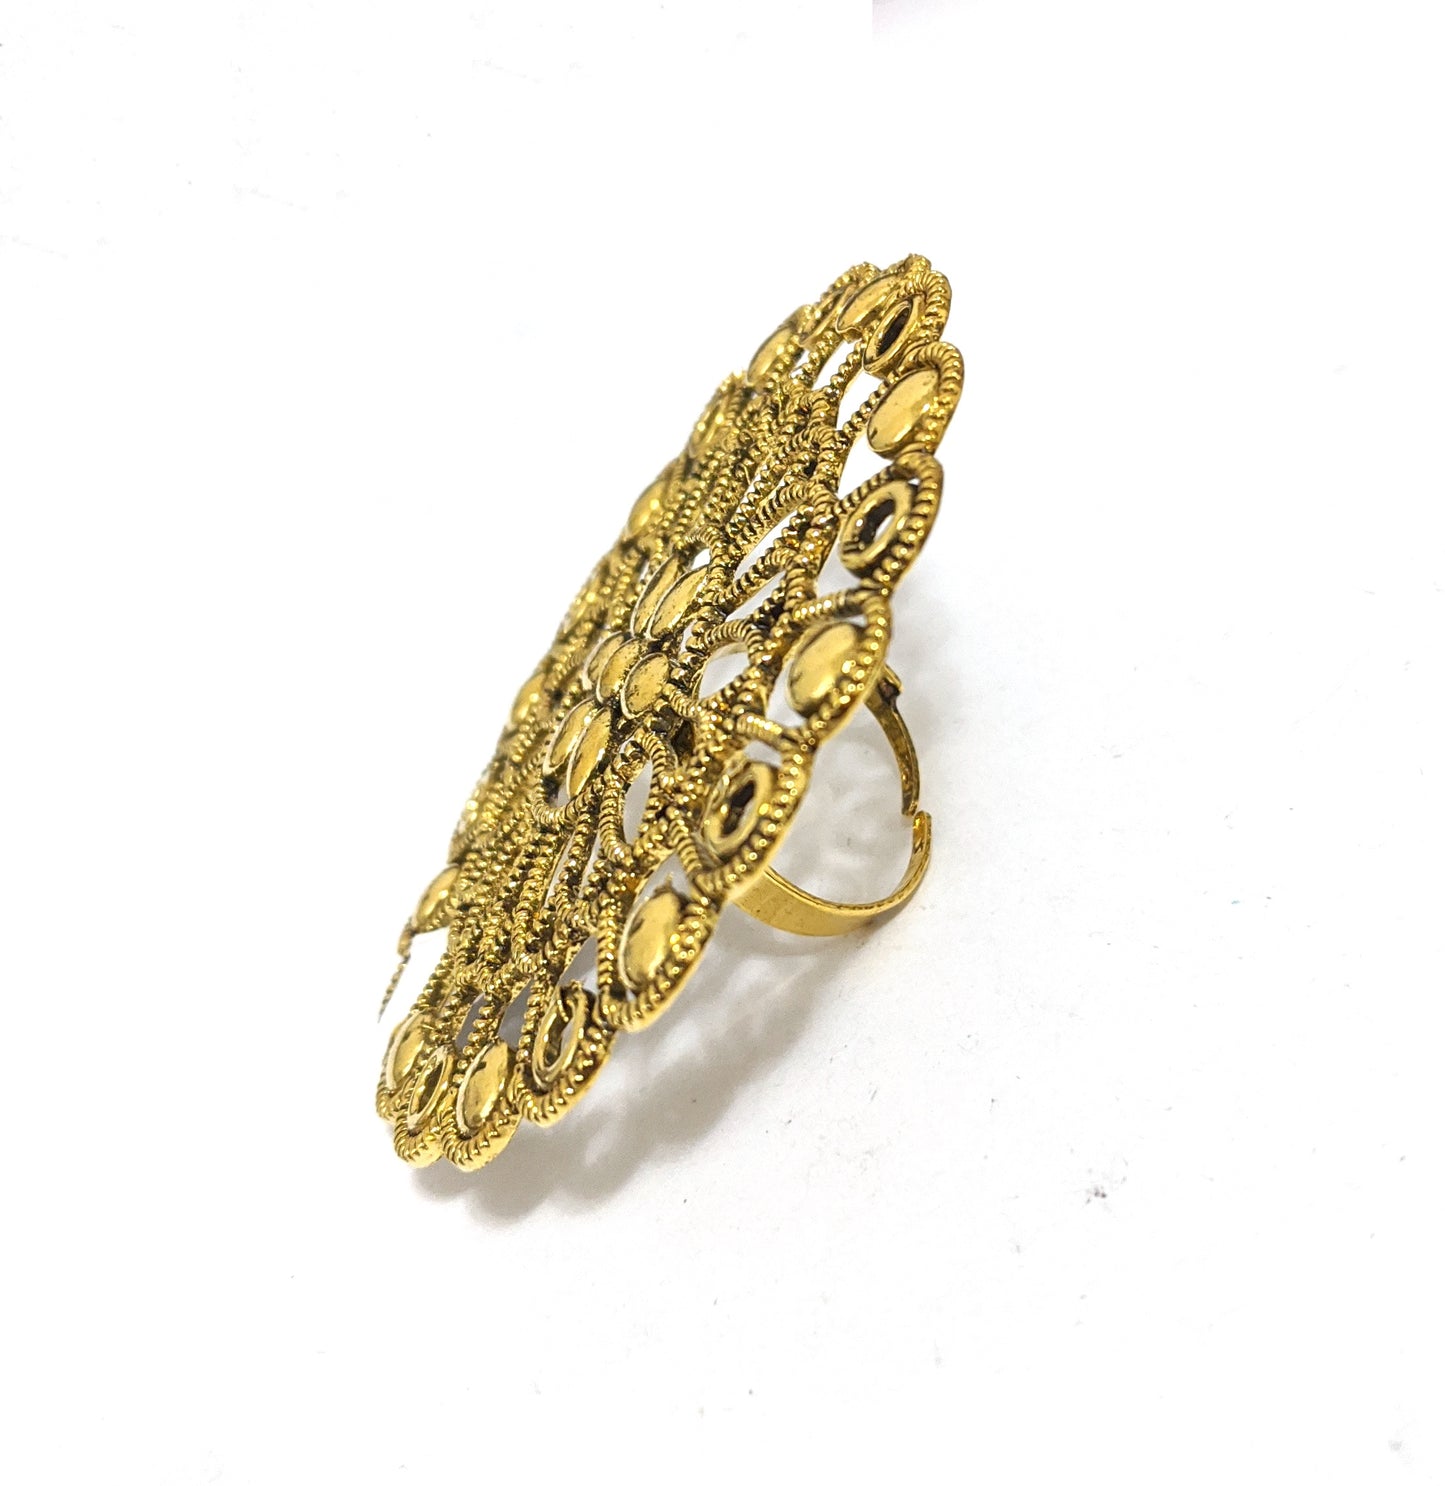 XXL Size Antique gold flower Round Adjustable Finger ring - Simpliful